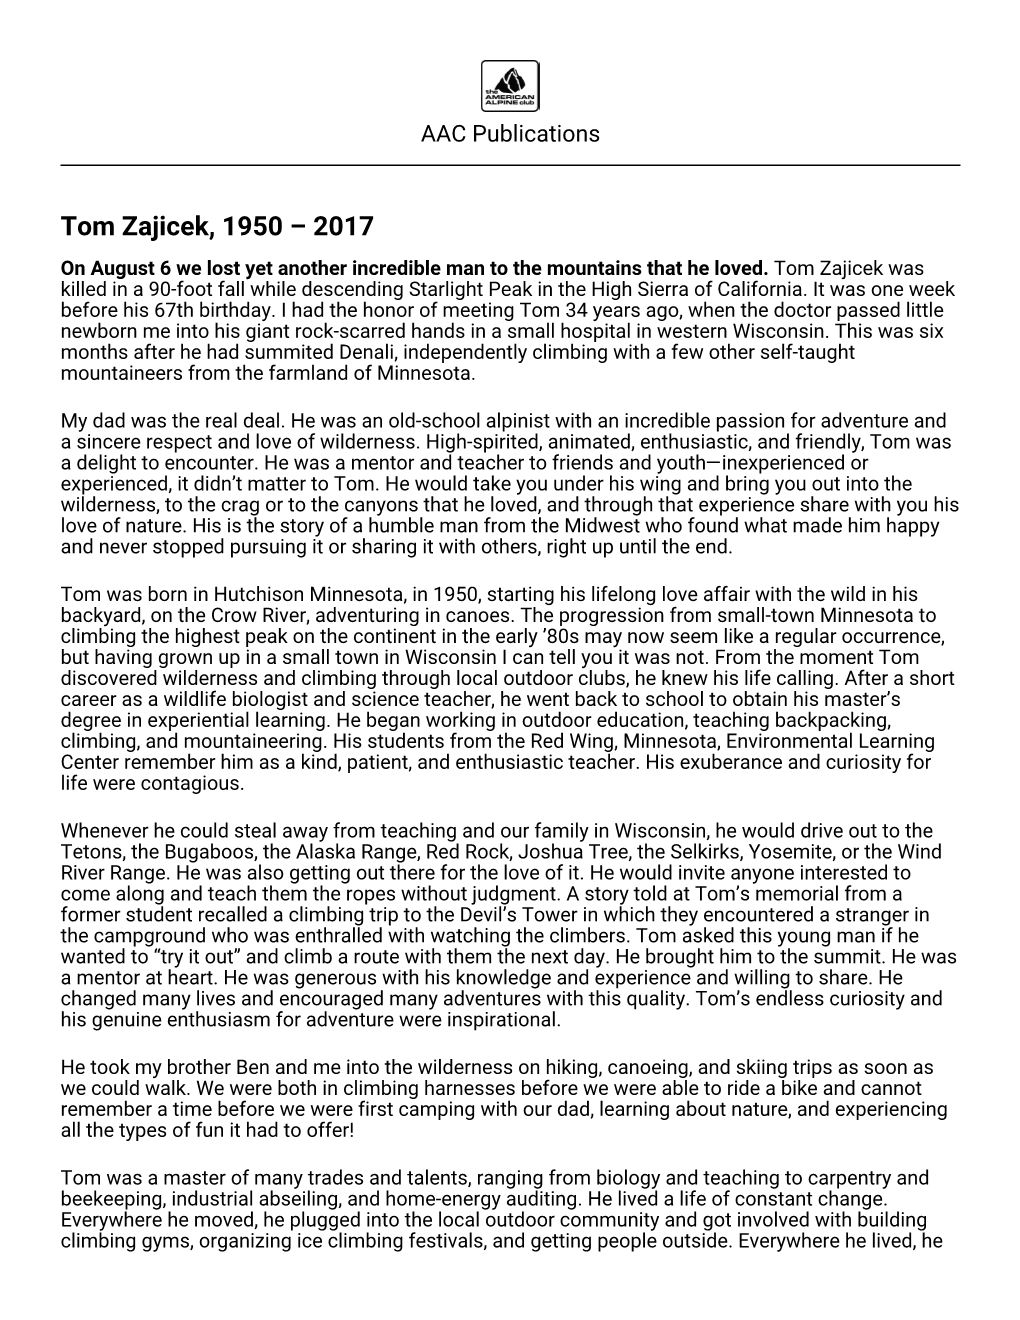 Tom Zajicek, 1950 – 2017 on August 6 We Lost Yet Another Incredible Man to the Mountains That He Loved